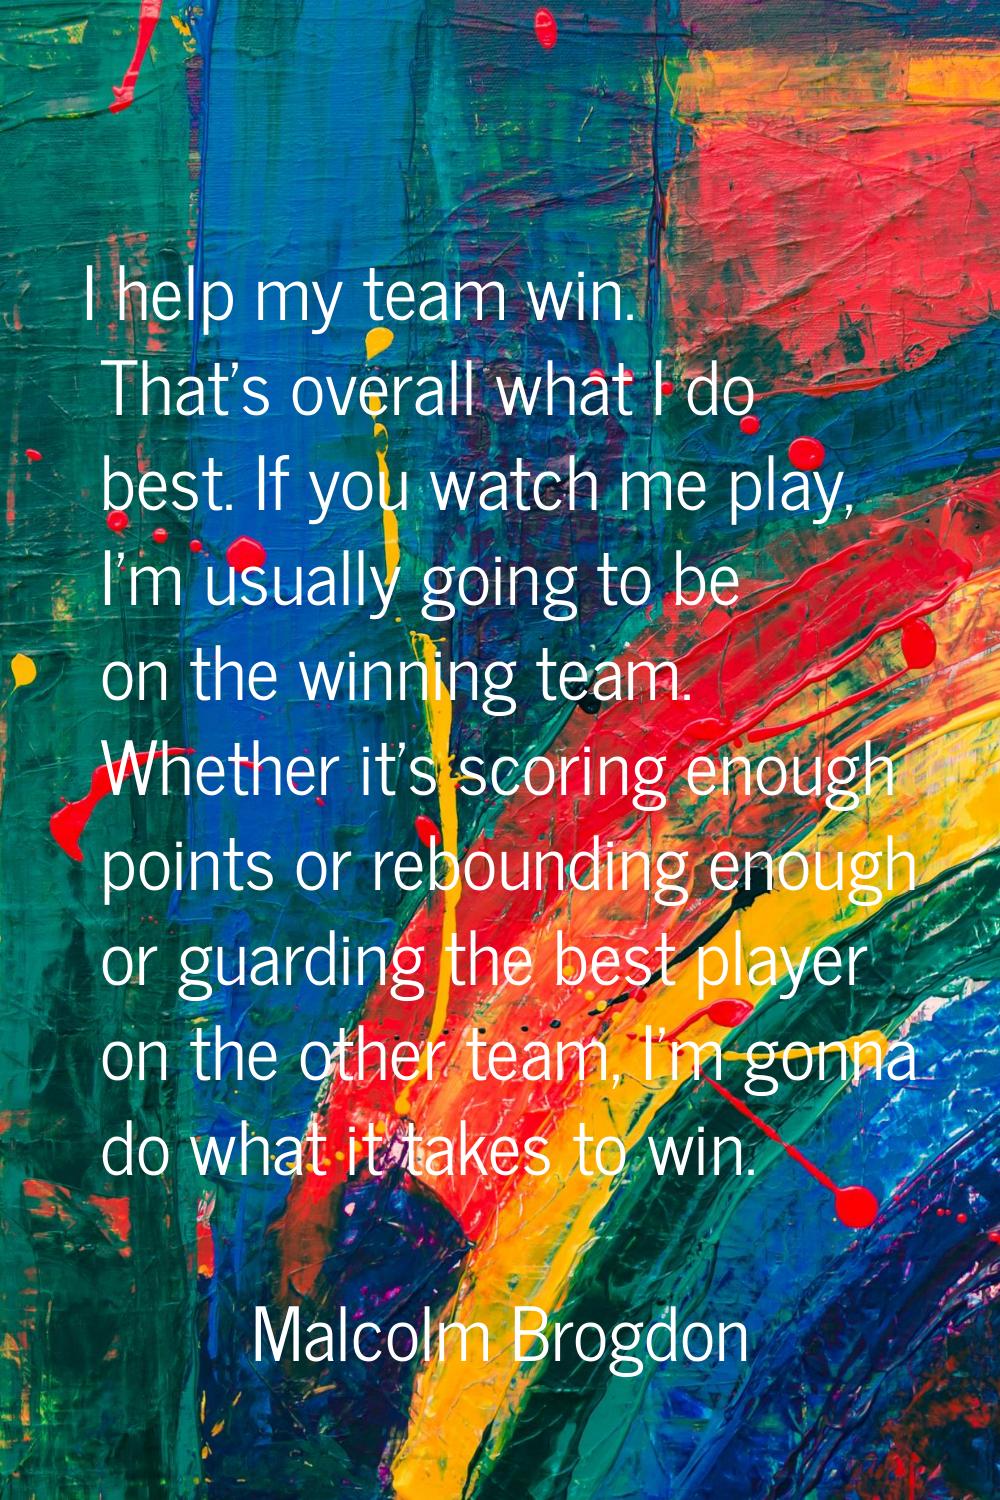 I help my team win. That's overall what I do best. If you watch me play, I'm usually going to be on